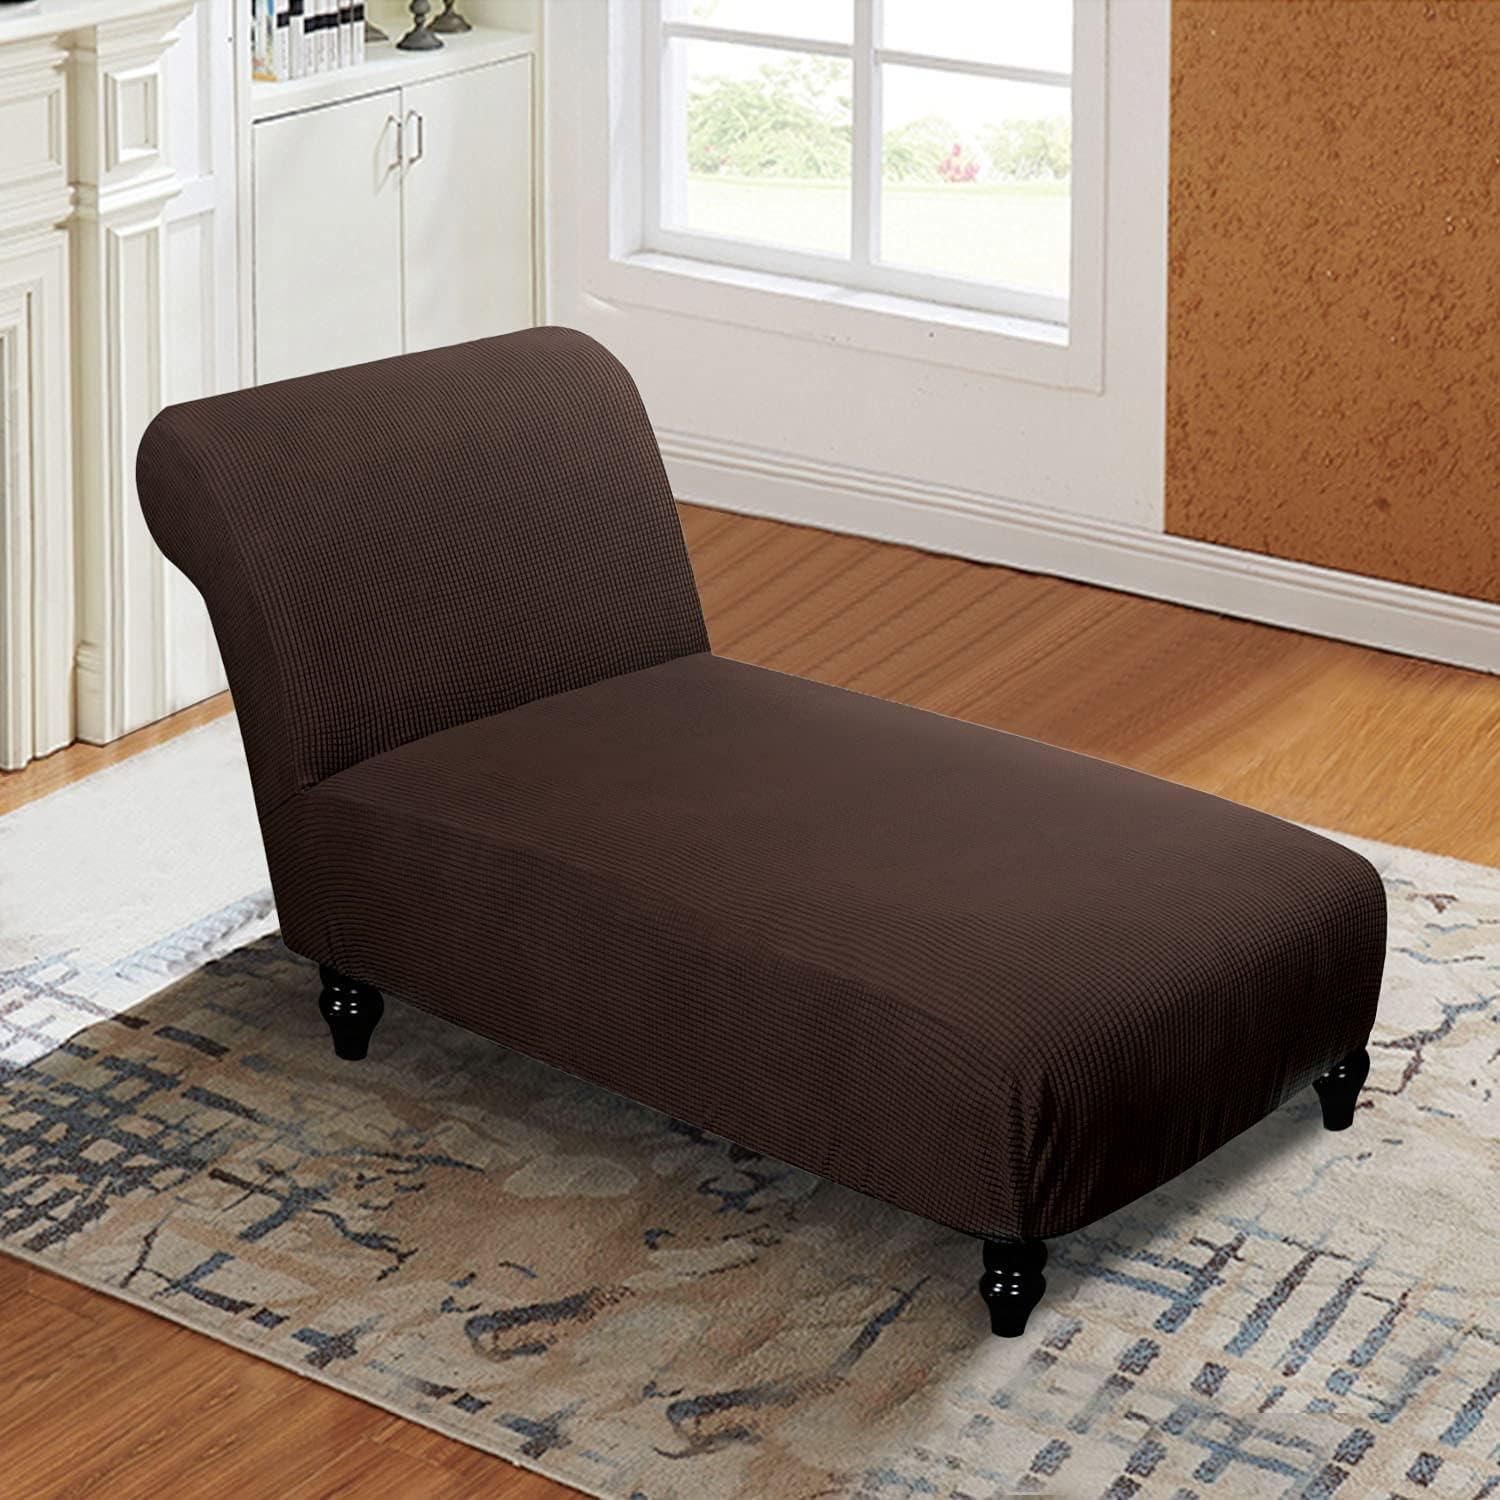 Jacquard Chaise Lounge Cover, Slipcover Brown Recliner Sofa Brown - Massive Discounts